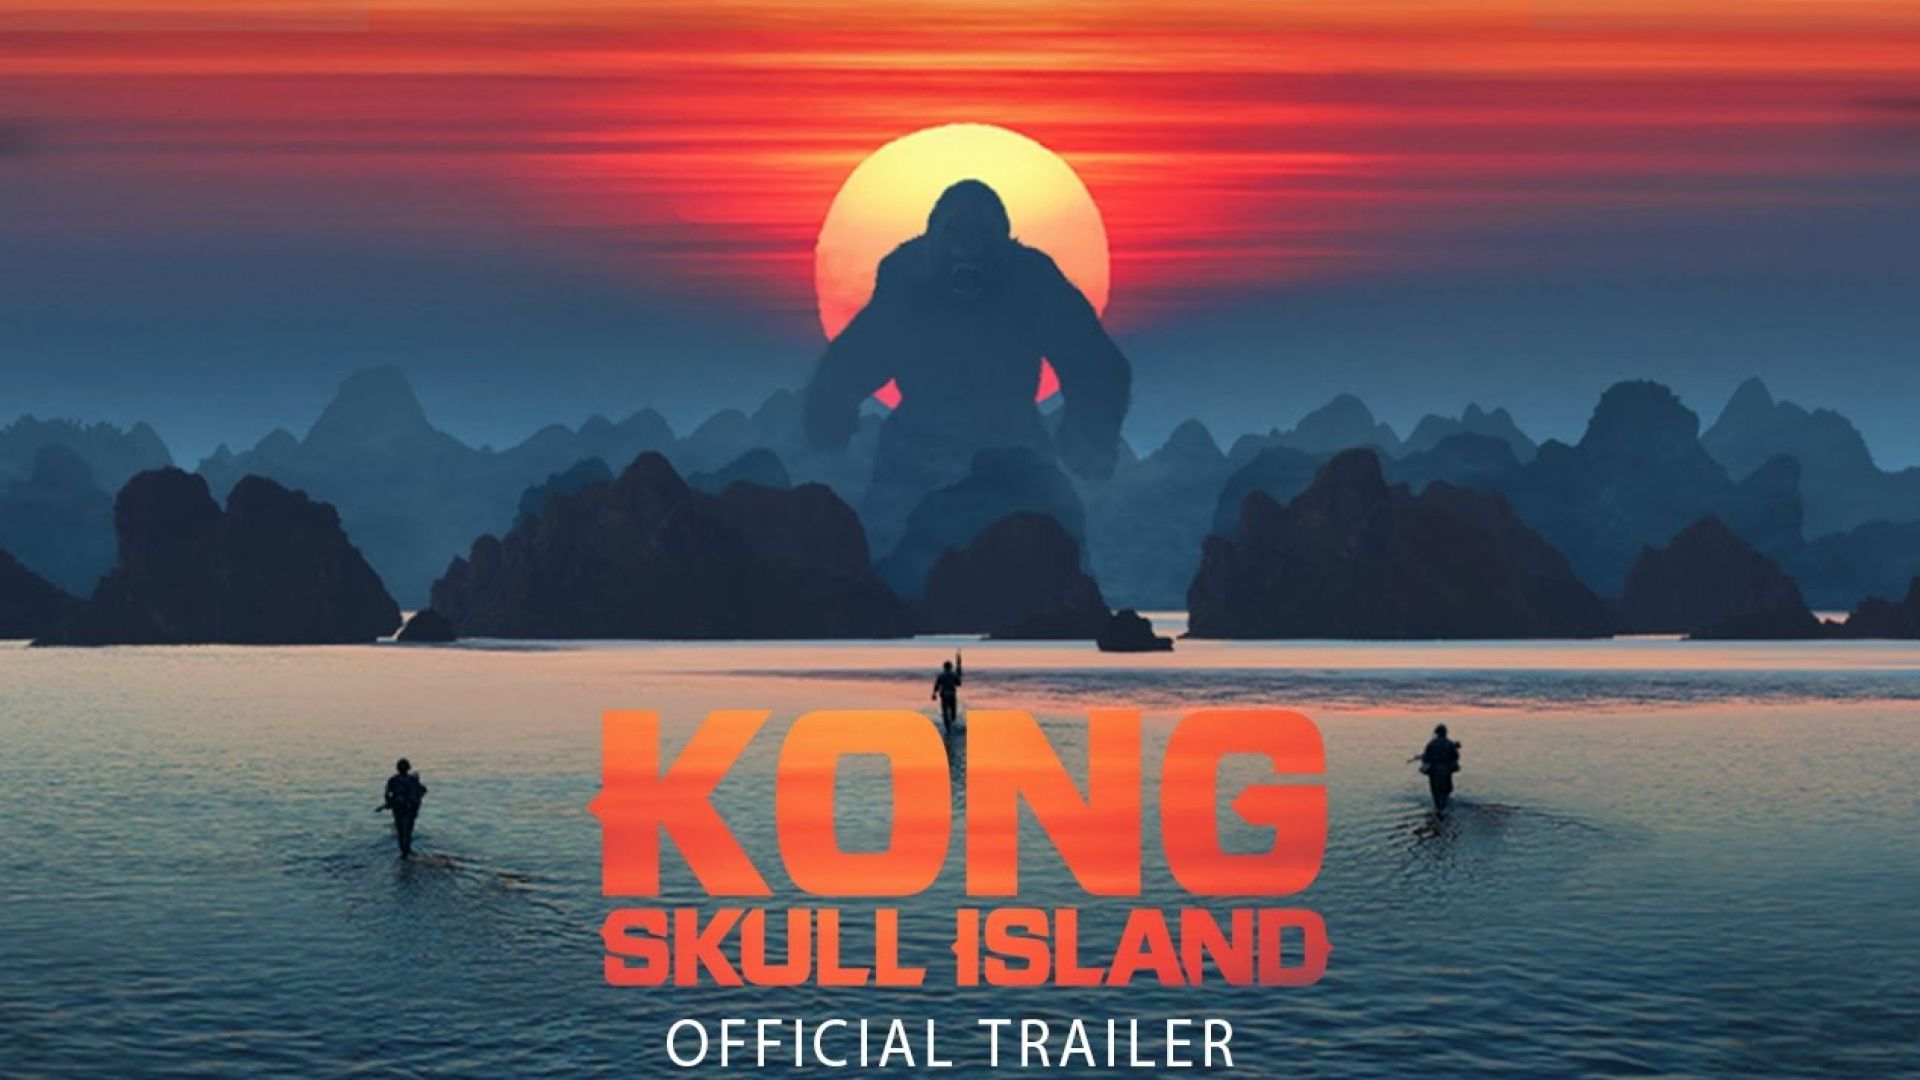 Watch the newly-released &#039;Kong: Skull Island&#039; trailer. Out M